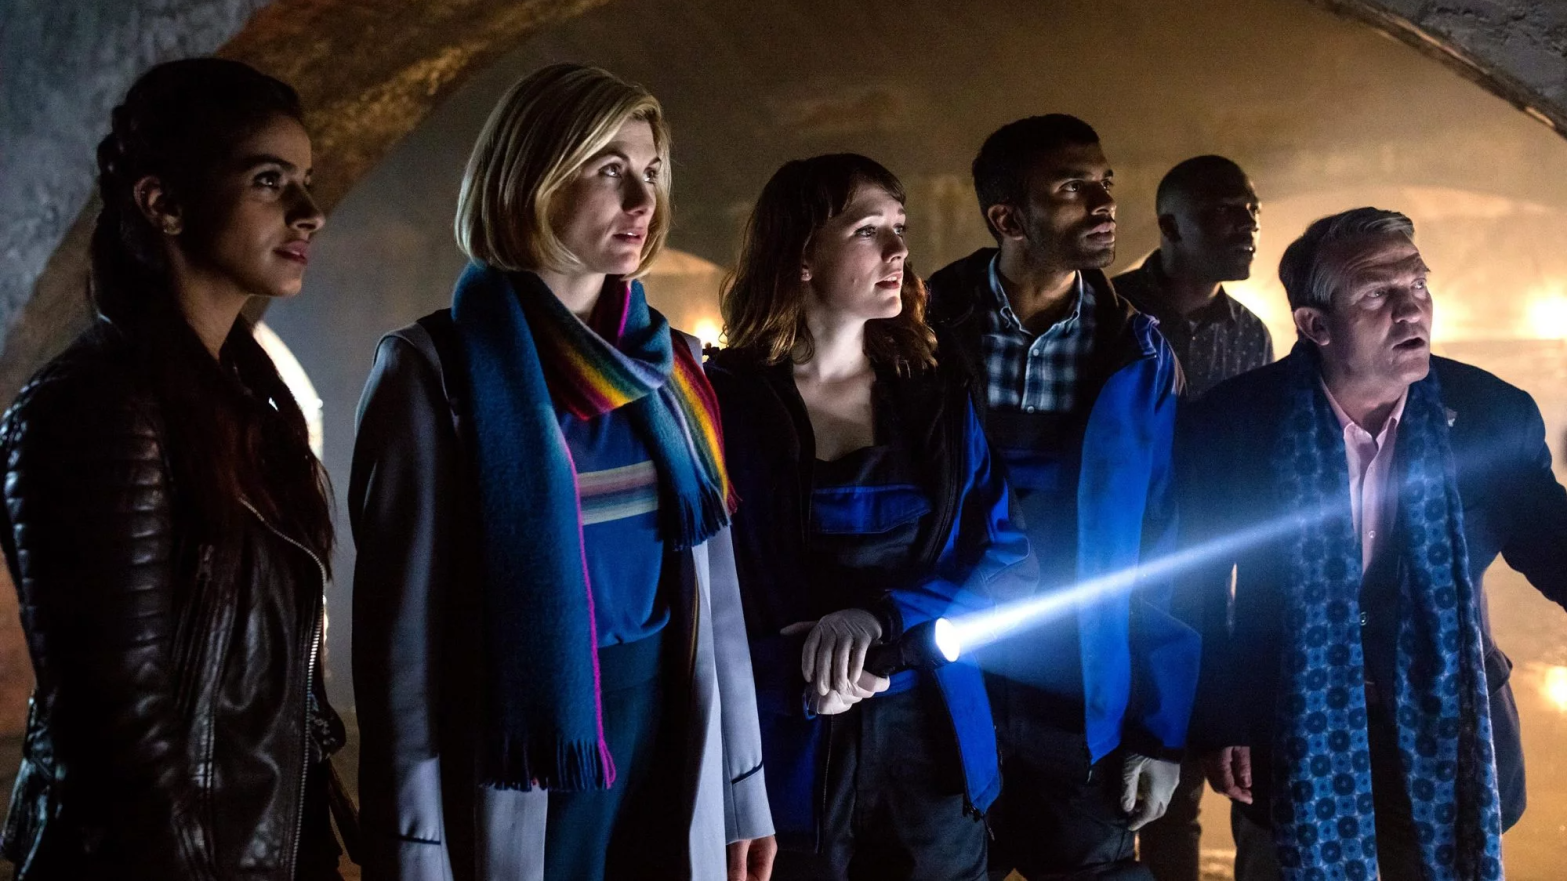 From the Doctor Who New Year's special.  (Image: BBC)